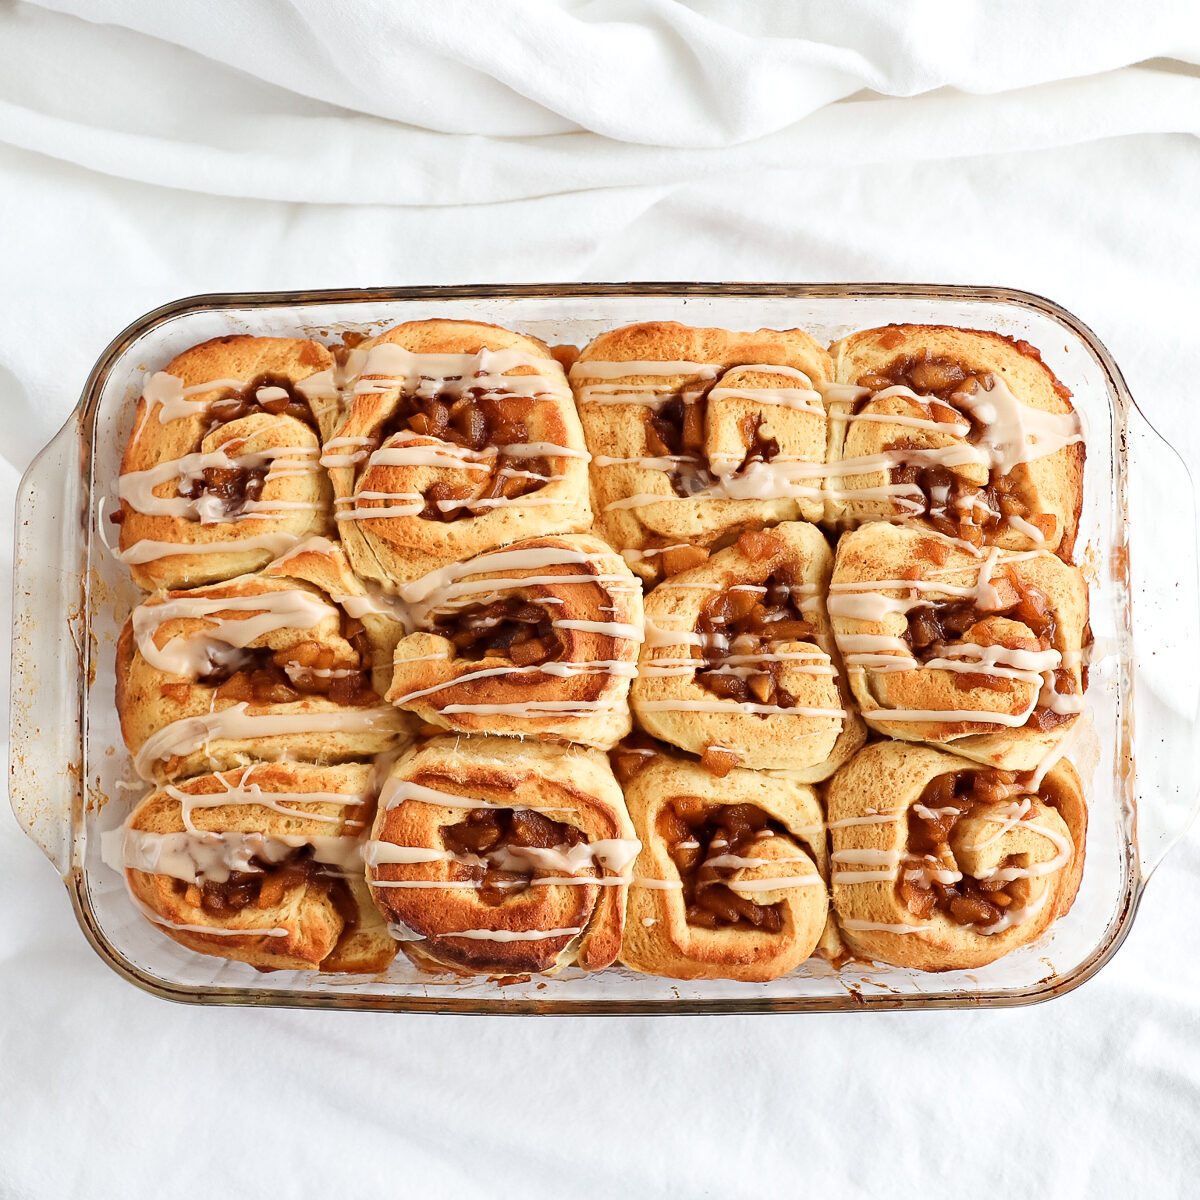 9 x 13 inch glass pan with 12 baked cinnamon buns in it. They have pale icing drizzle over horizontally.